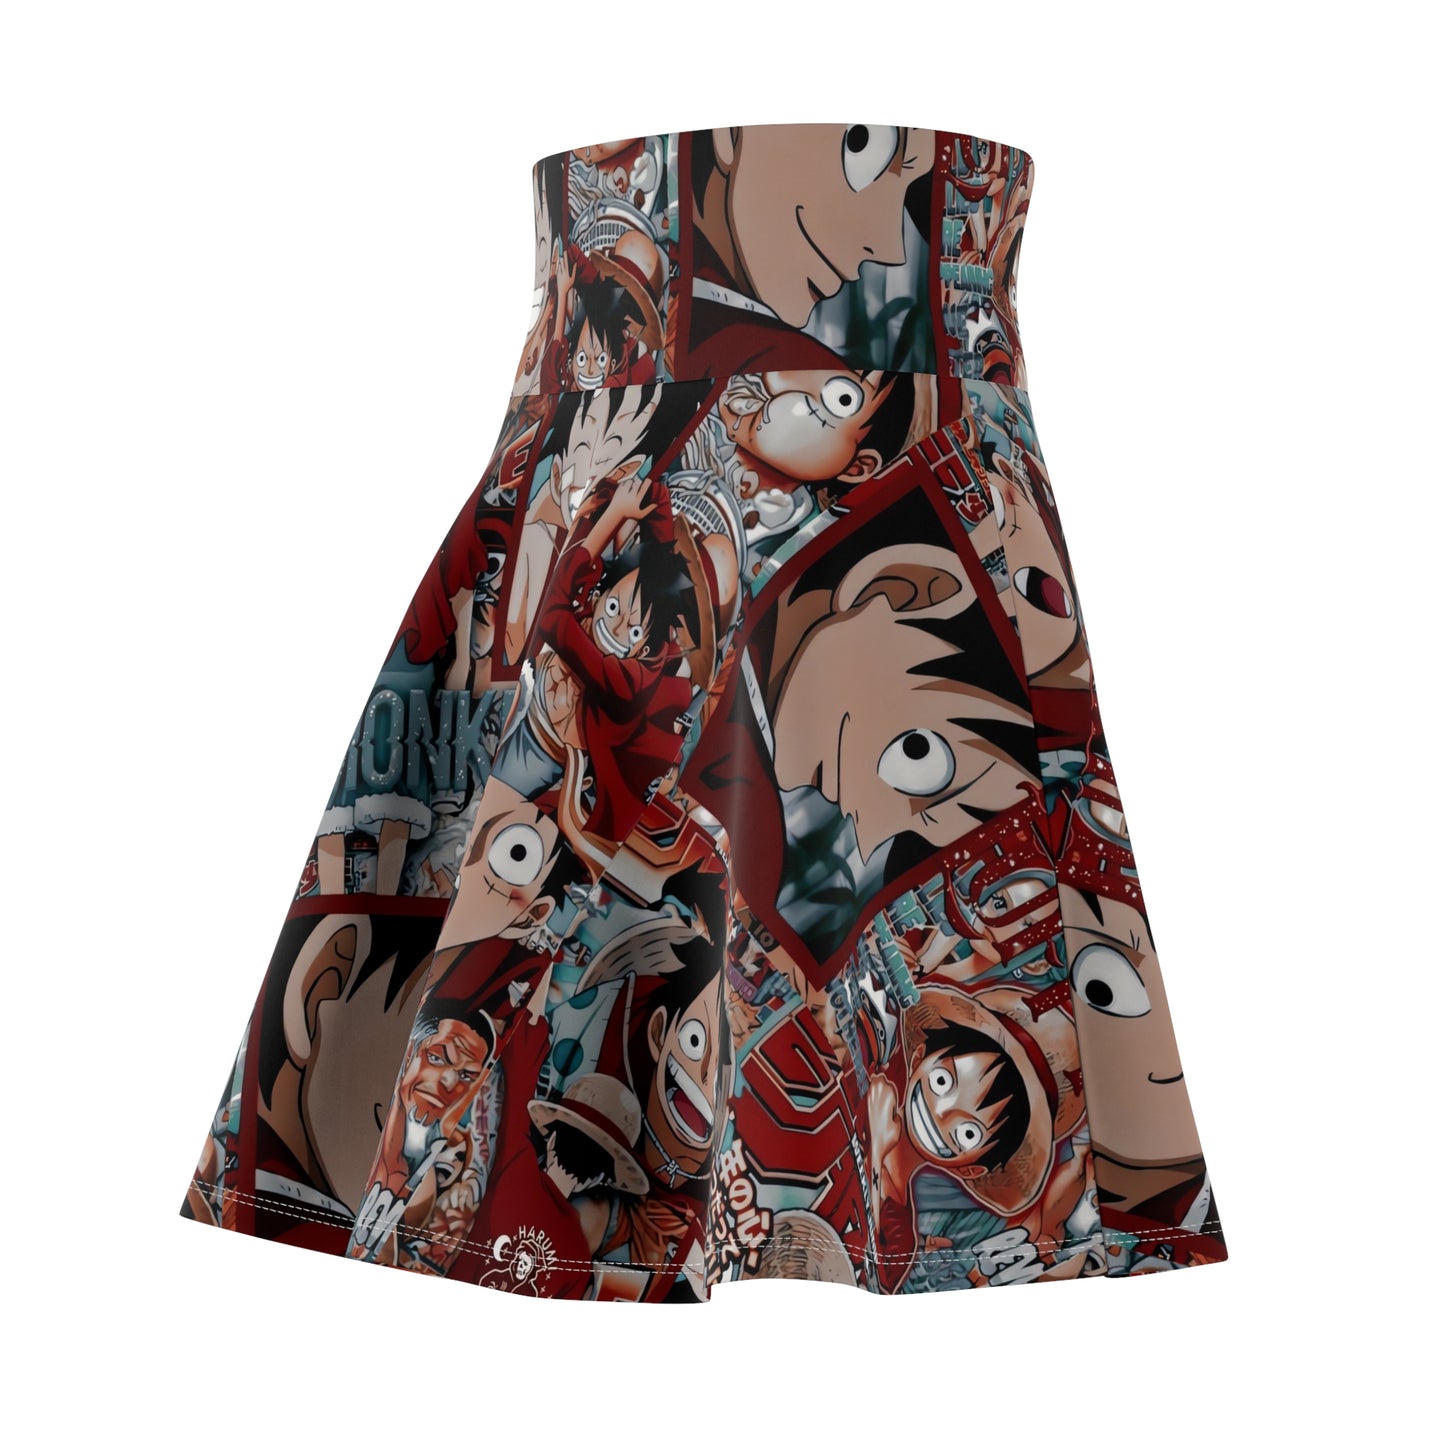 One Piece Anime Monkey D Luffy Red Collage Women's Skater Skirt